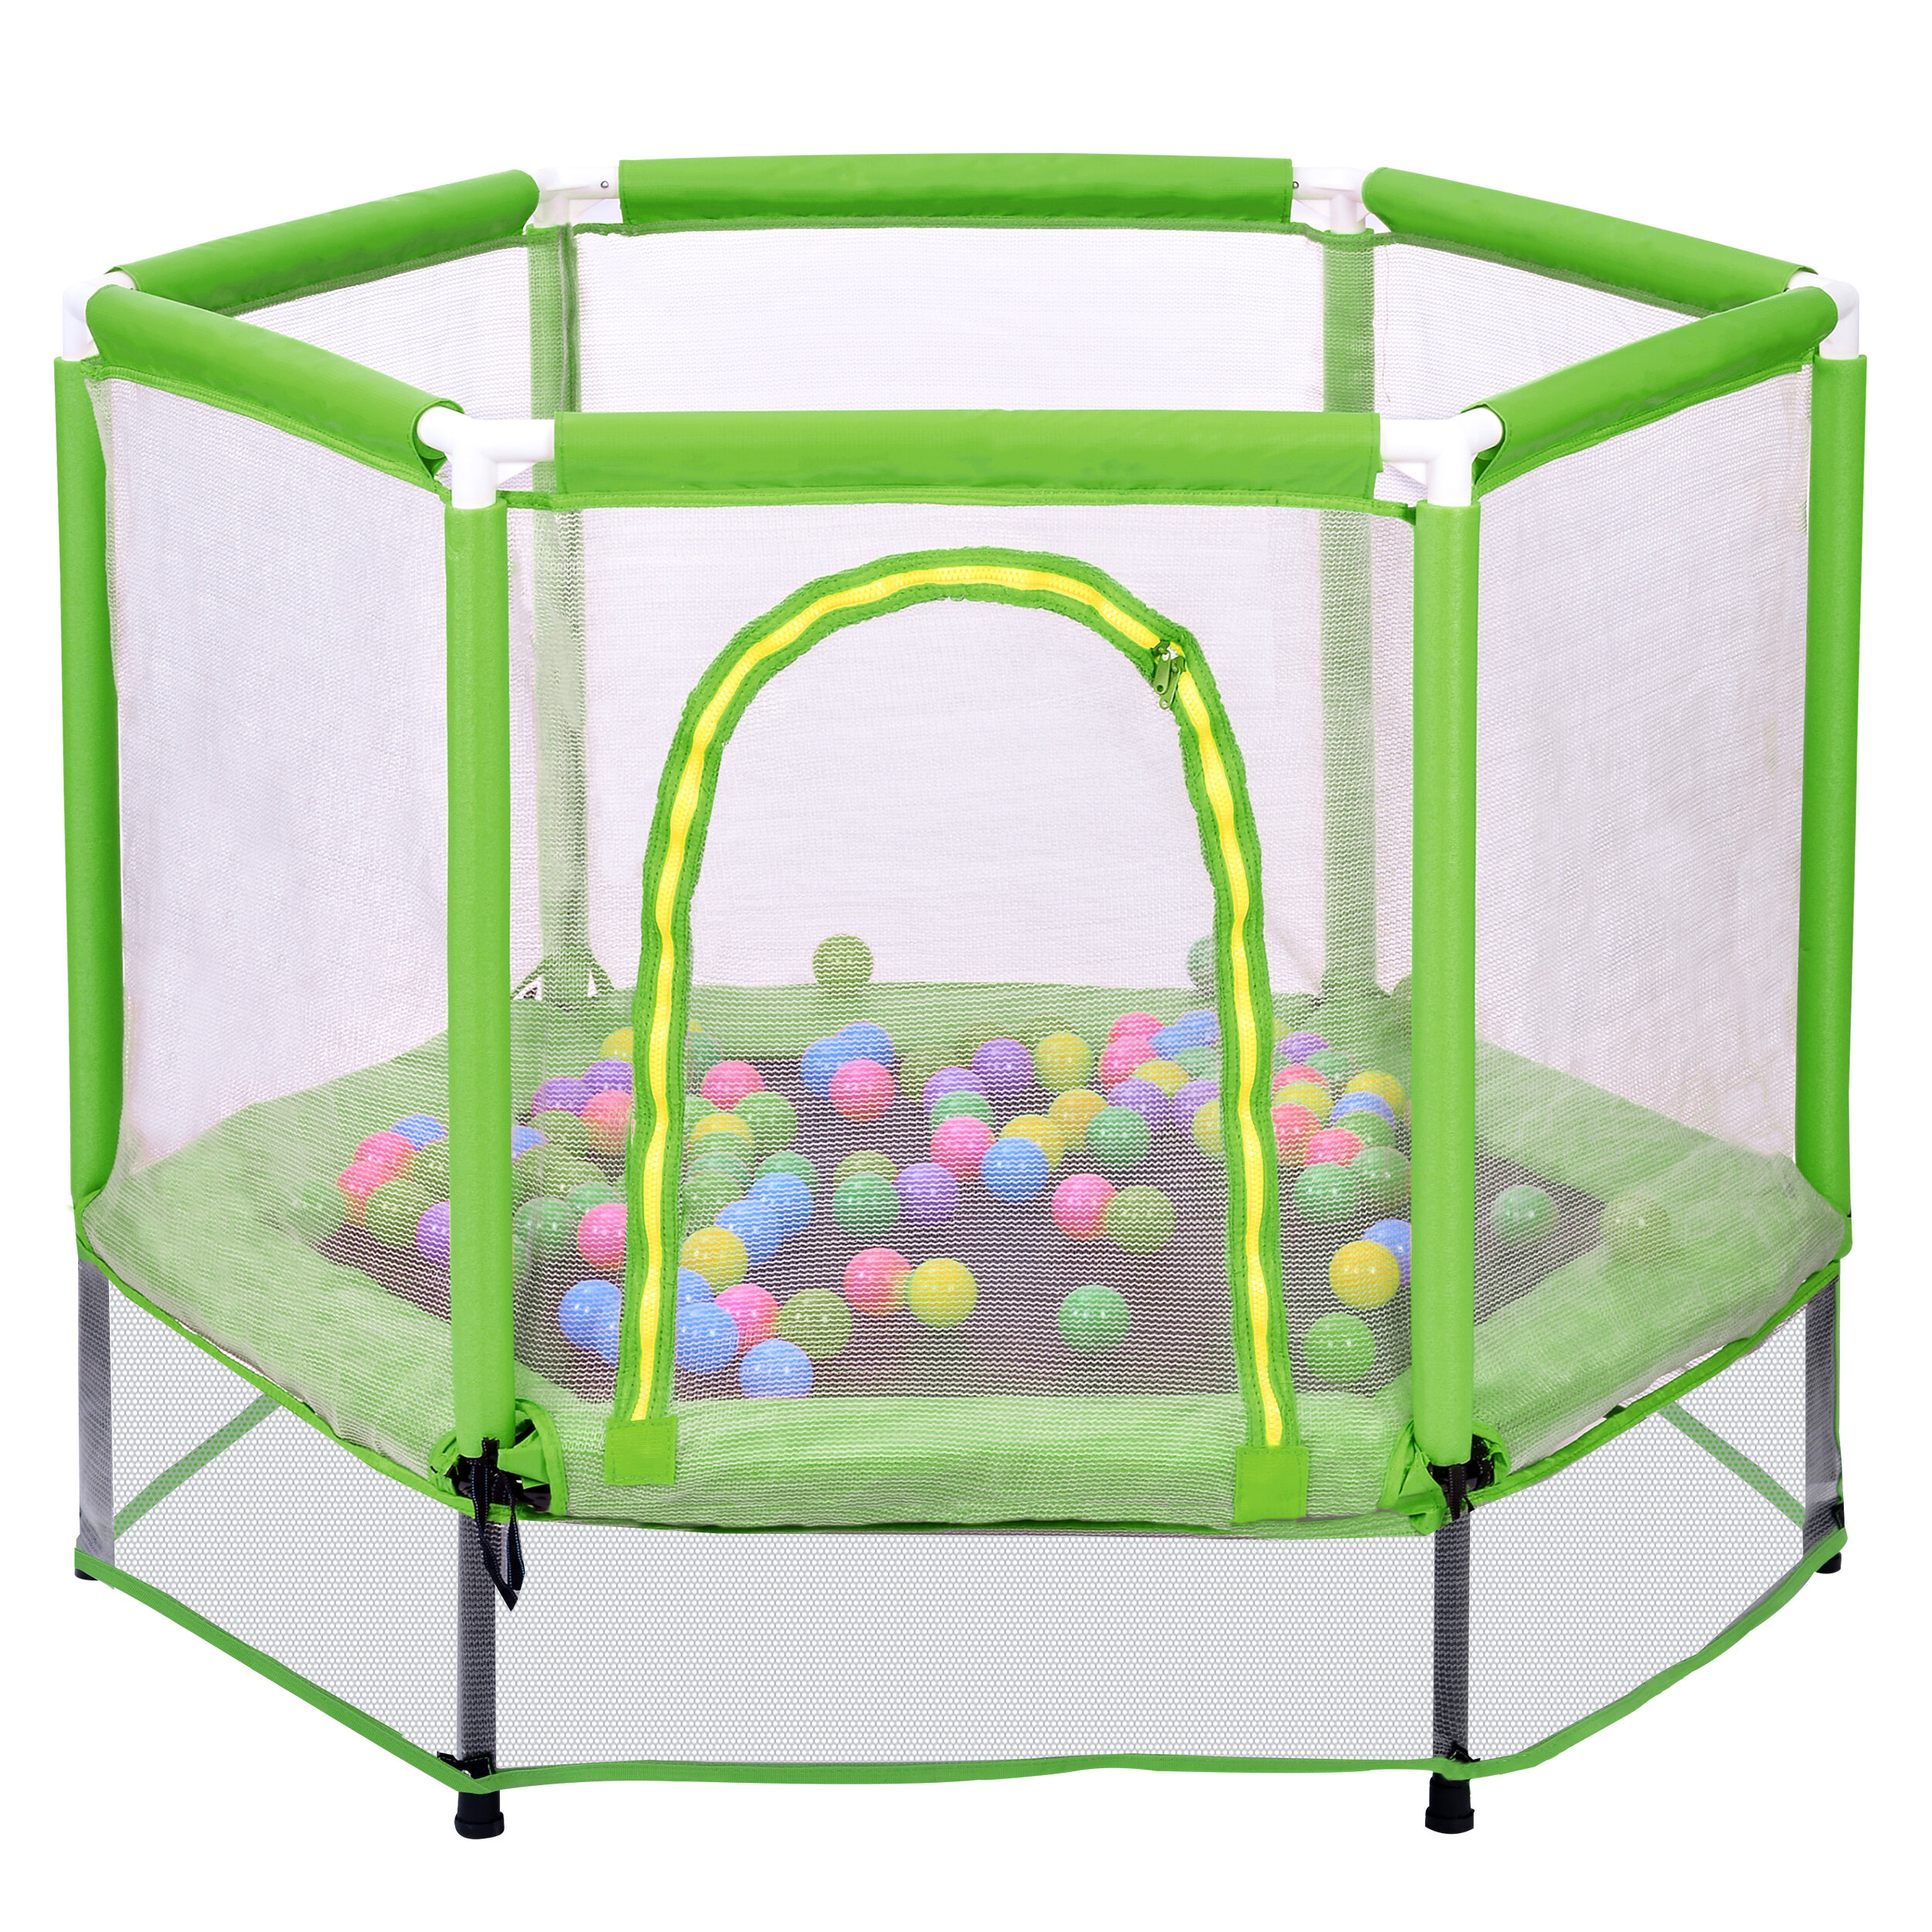 Hombck 55 Toddlers Trampoline With Safety Enclosure Net And Balls Indoor Outdoor Mini Trampoline For Kids Orange Wayfair